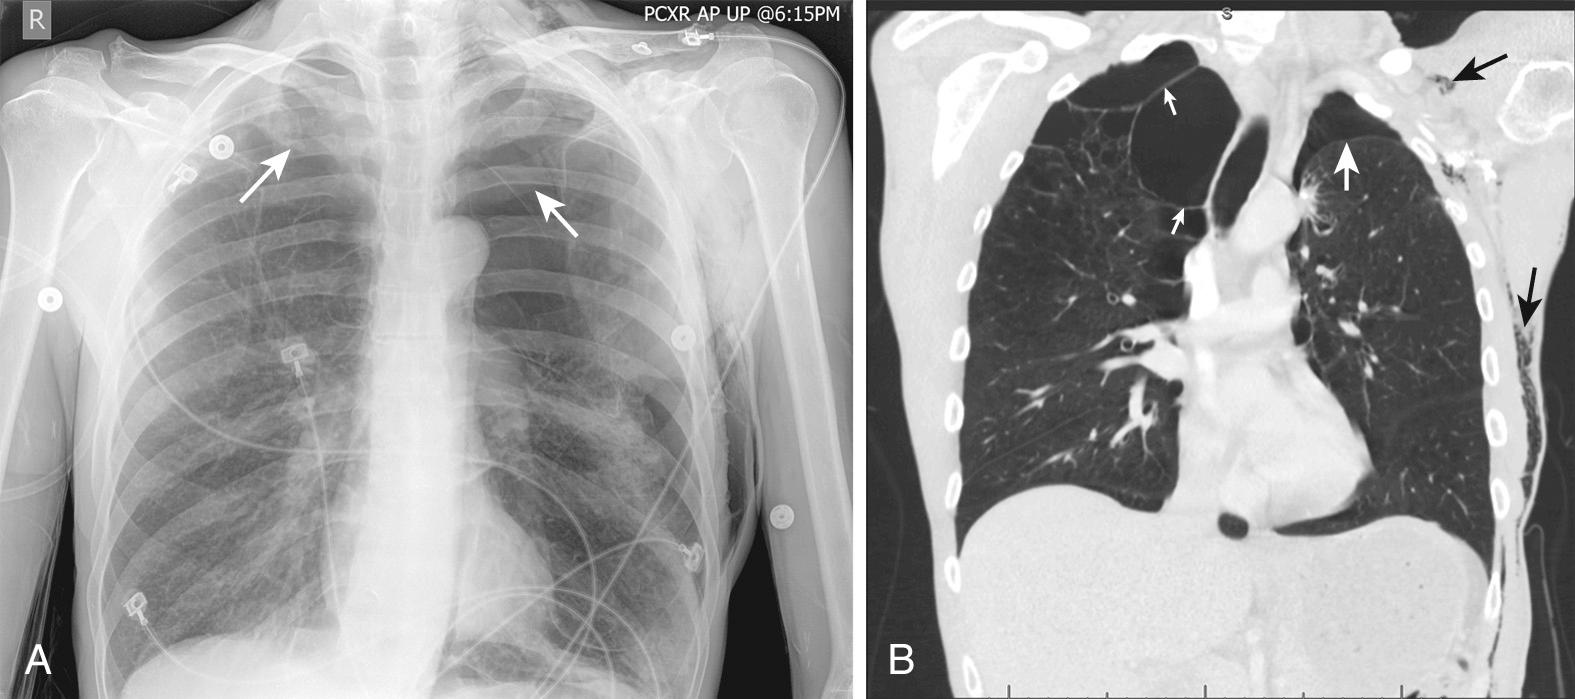 Figure 10.8, Pneumothorax and bullous emphysema. This patient had a history of severe chronic obstructive pulmonary disease and arrived at the emergency department in respiratory distress. A, On the chest radiograph, both apices are relatively radiolucent and faint lines that are not clearly blebs or pleural reflections (arrows) can be seen coursing through. B, A computed tomography scan was obtained and defined the pathology in detail. In the right apex, there is no pneumothorax, but rather large blebs are present (small white arrows). On the left a pleural reflection is clearly visible (large white arrow), indicative of pneumothorax. Subcutaneous air is also noted in the thoracic soft tissues (black arrows), thus further supporting the diagnosis of pneumothorax. (This finding is also evident on the chest radiography but was overlooked on the initial interpretation.)